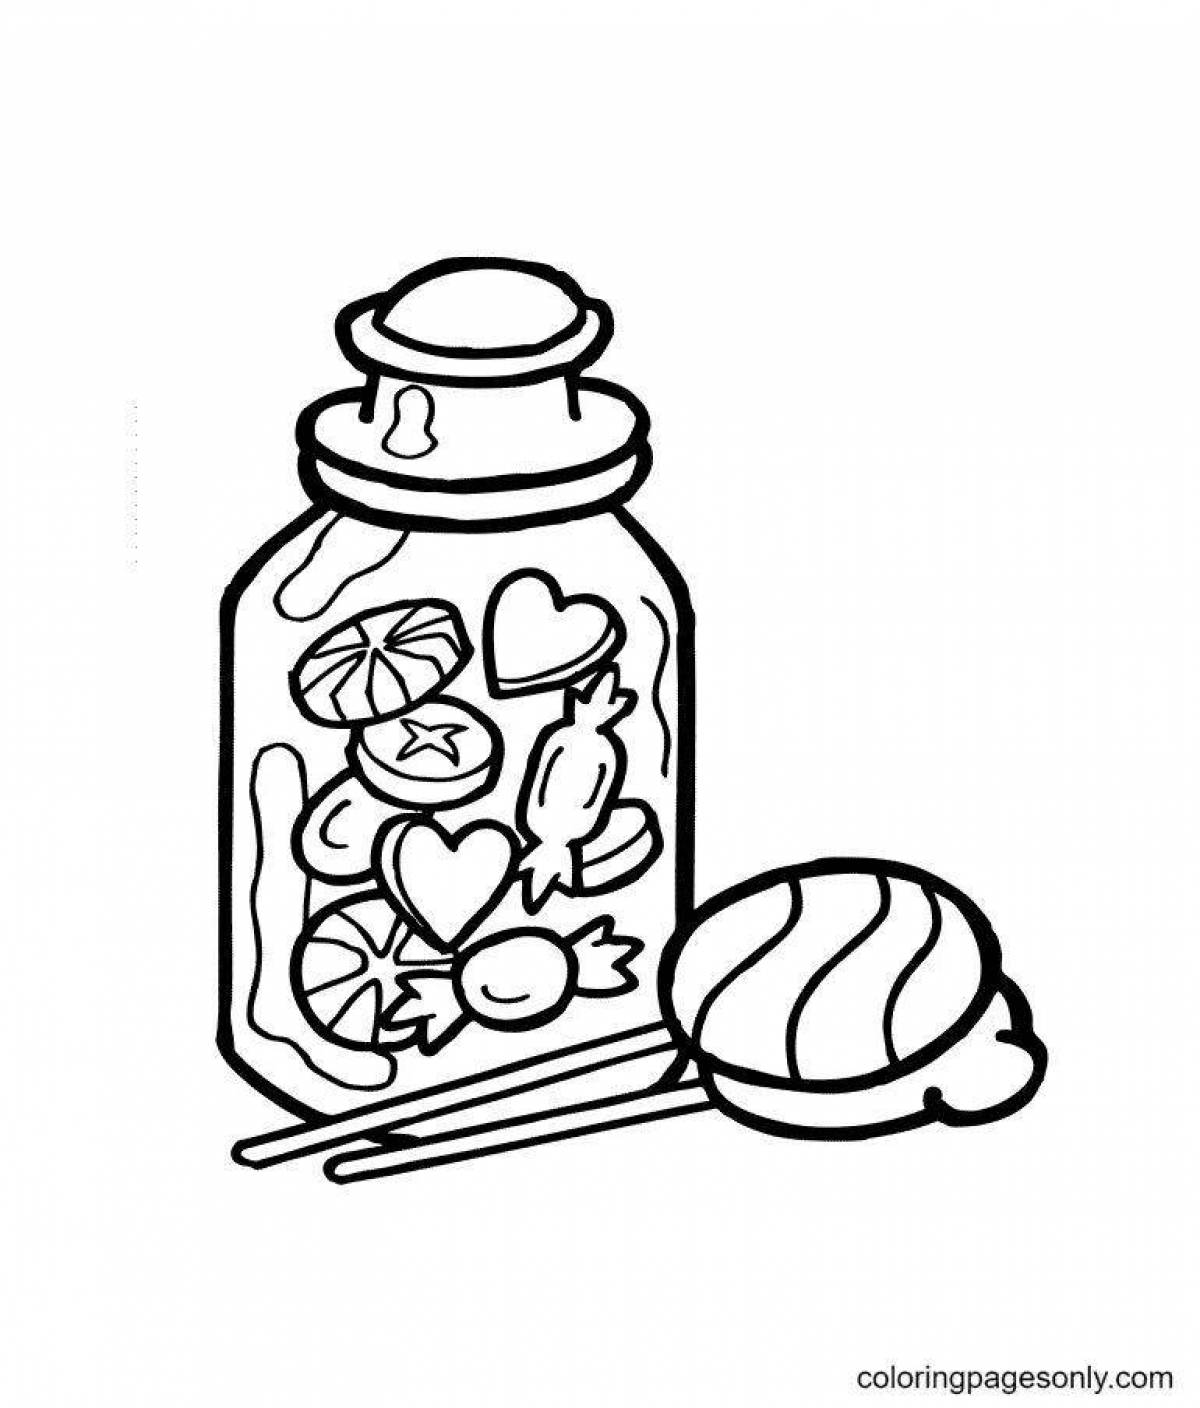 Animated marmalade coloring page